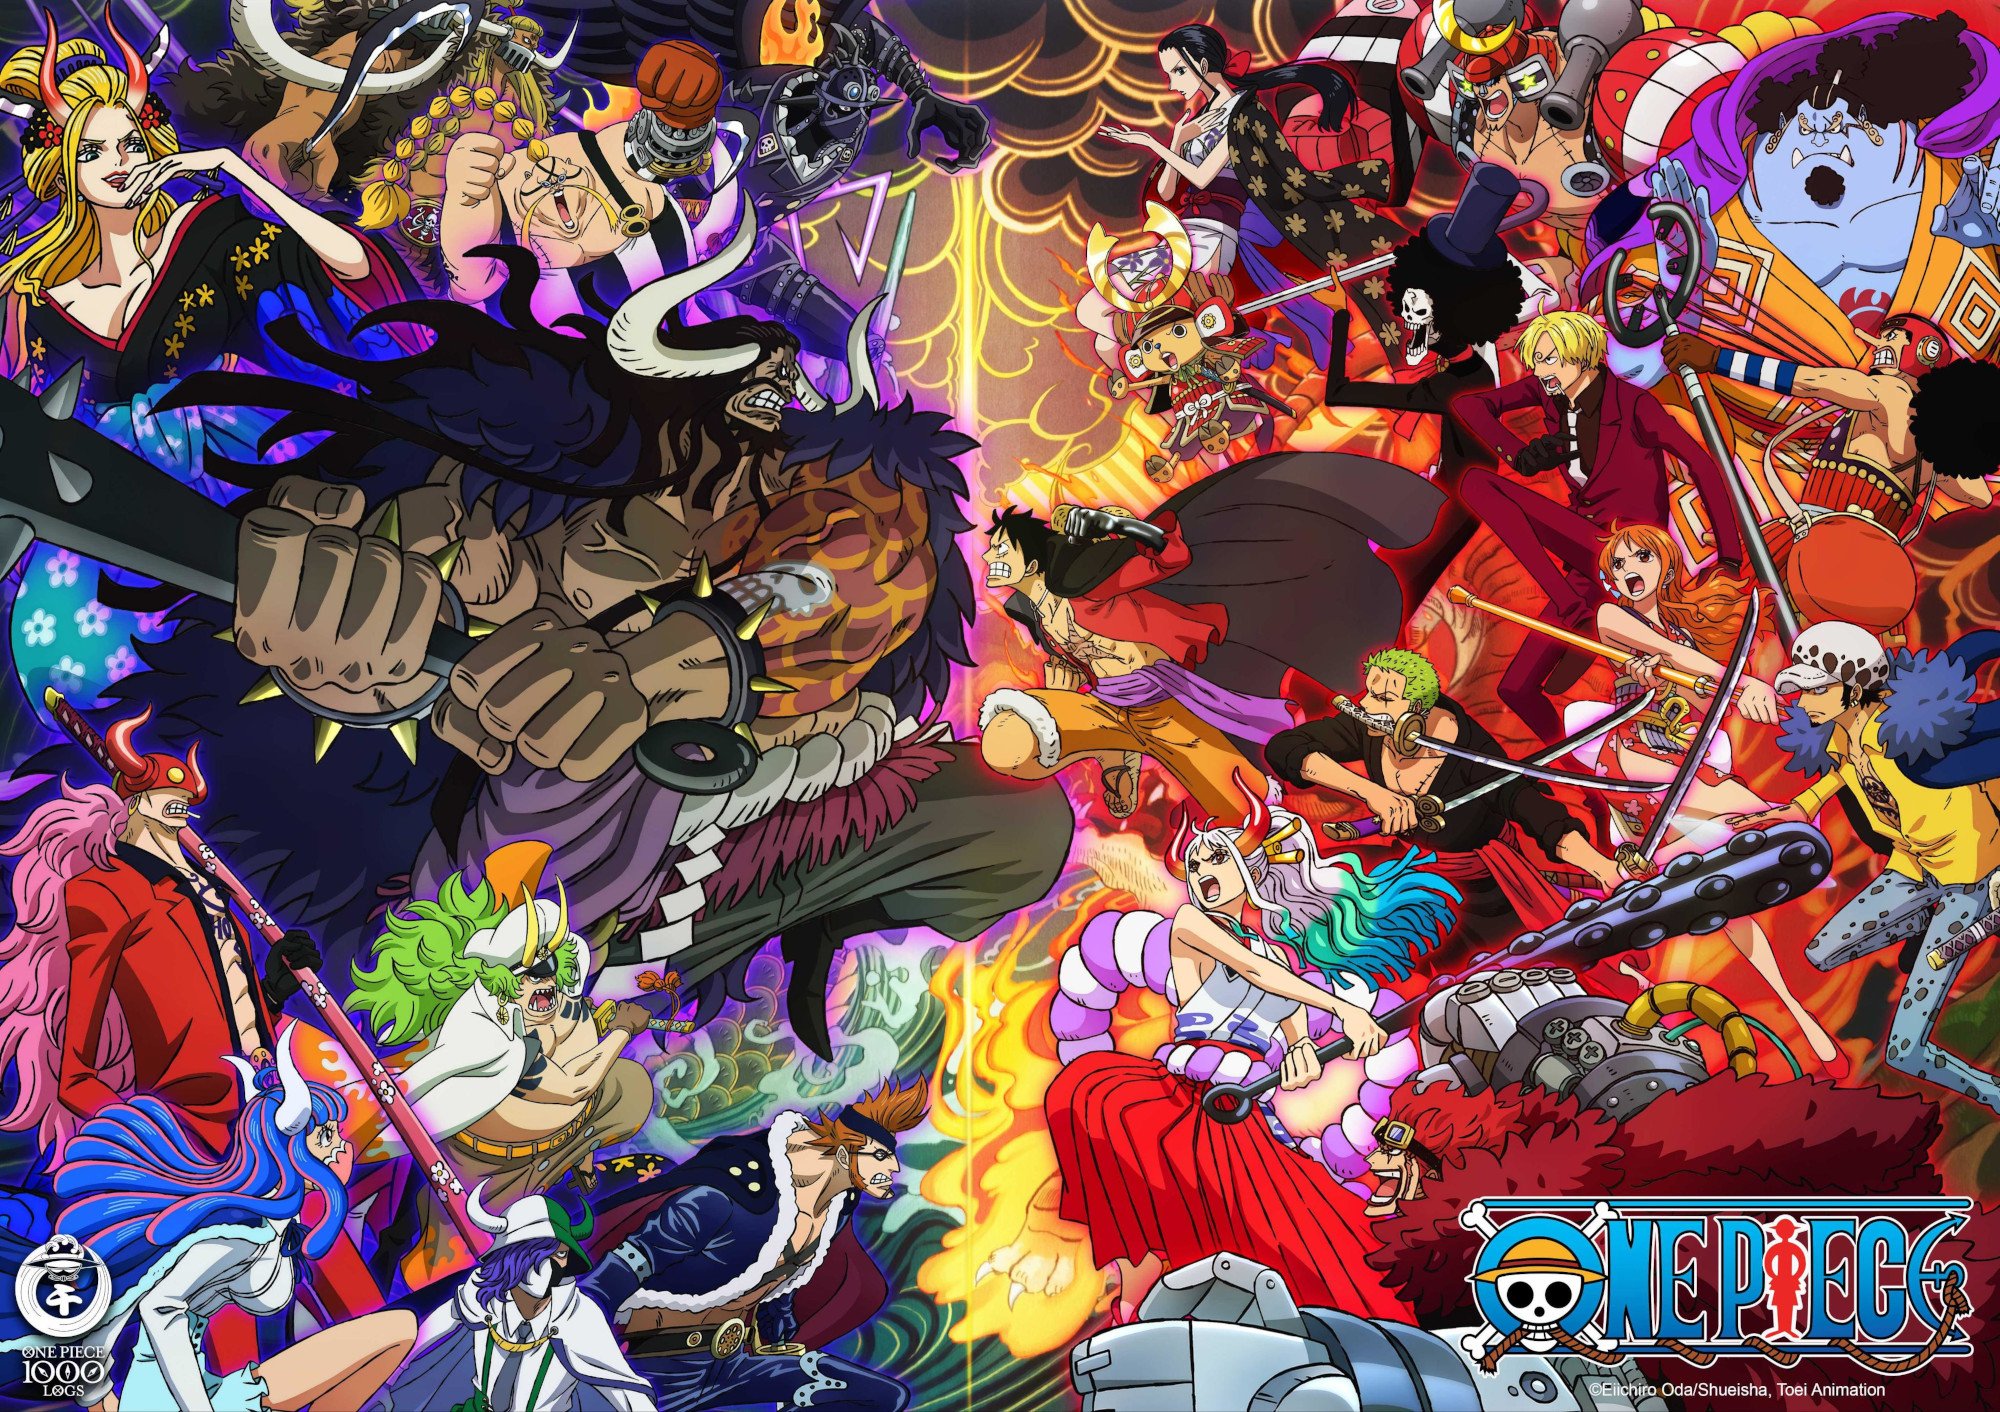 Key art for 'One Piece' Episode 1,000, which teases the characters clashing.